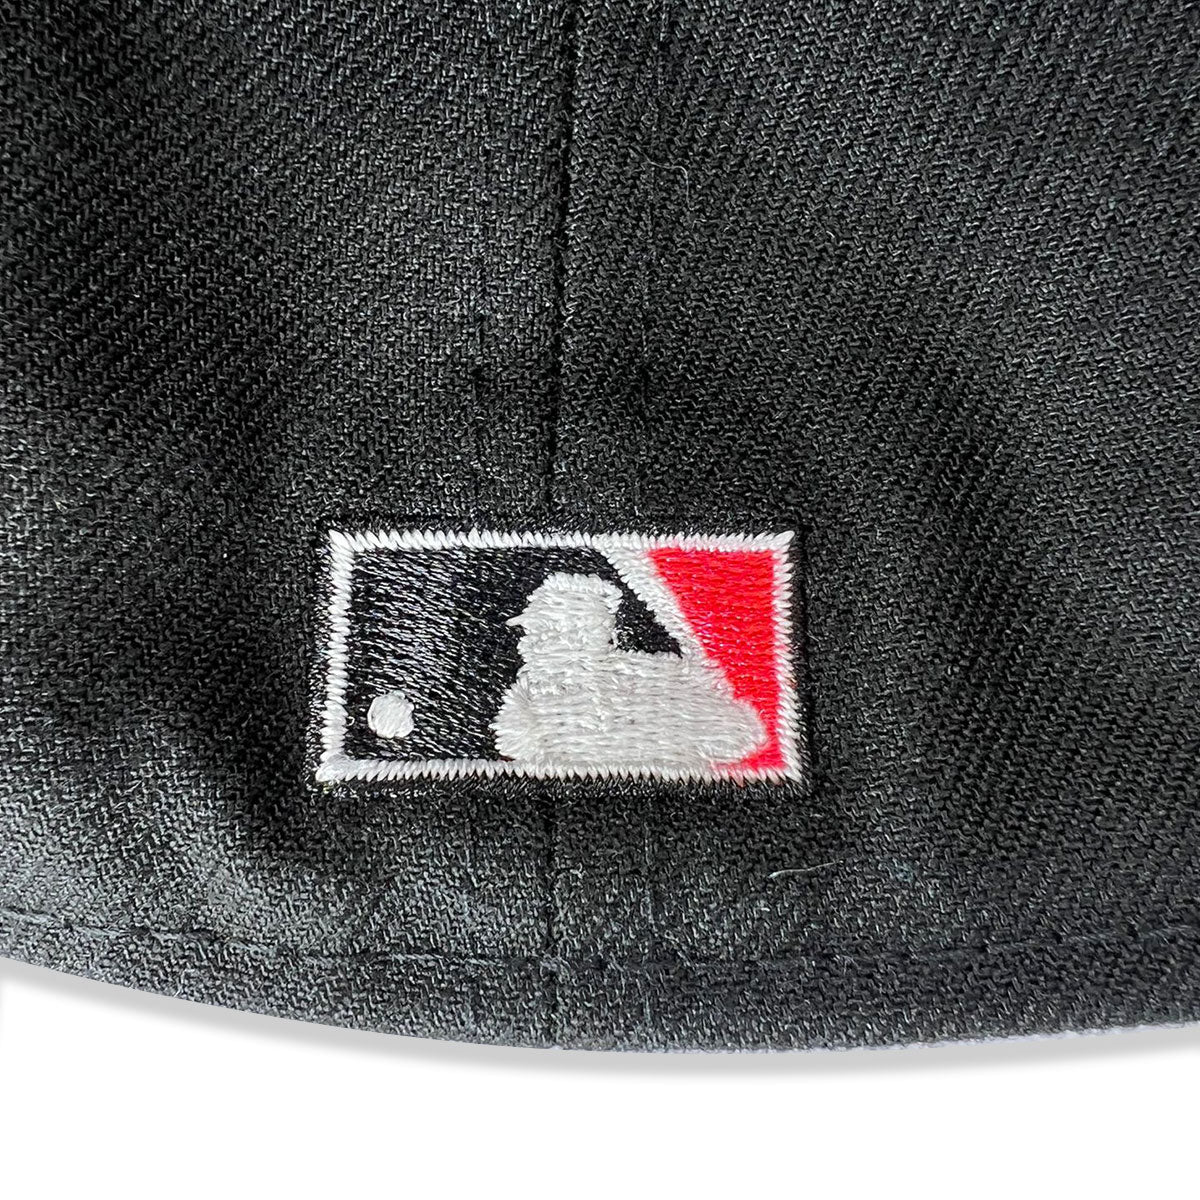 New Era Miami Marlins Park Patch 59FIFTY Fitted